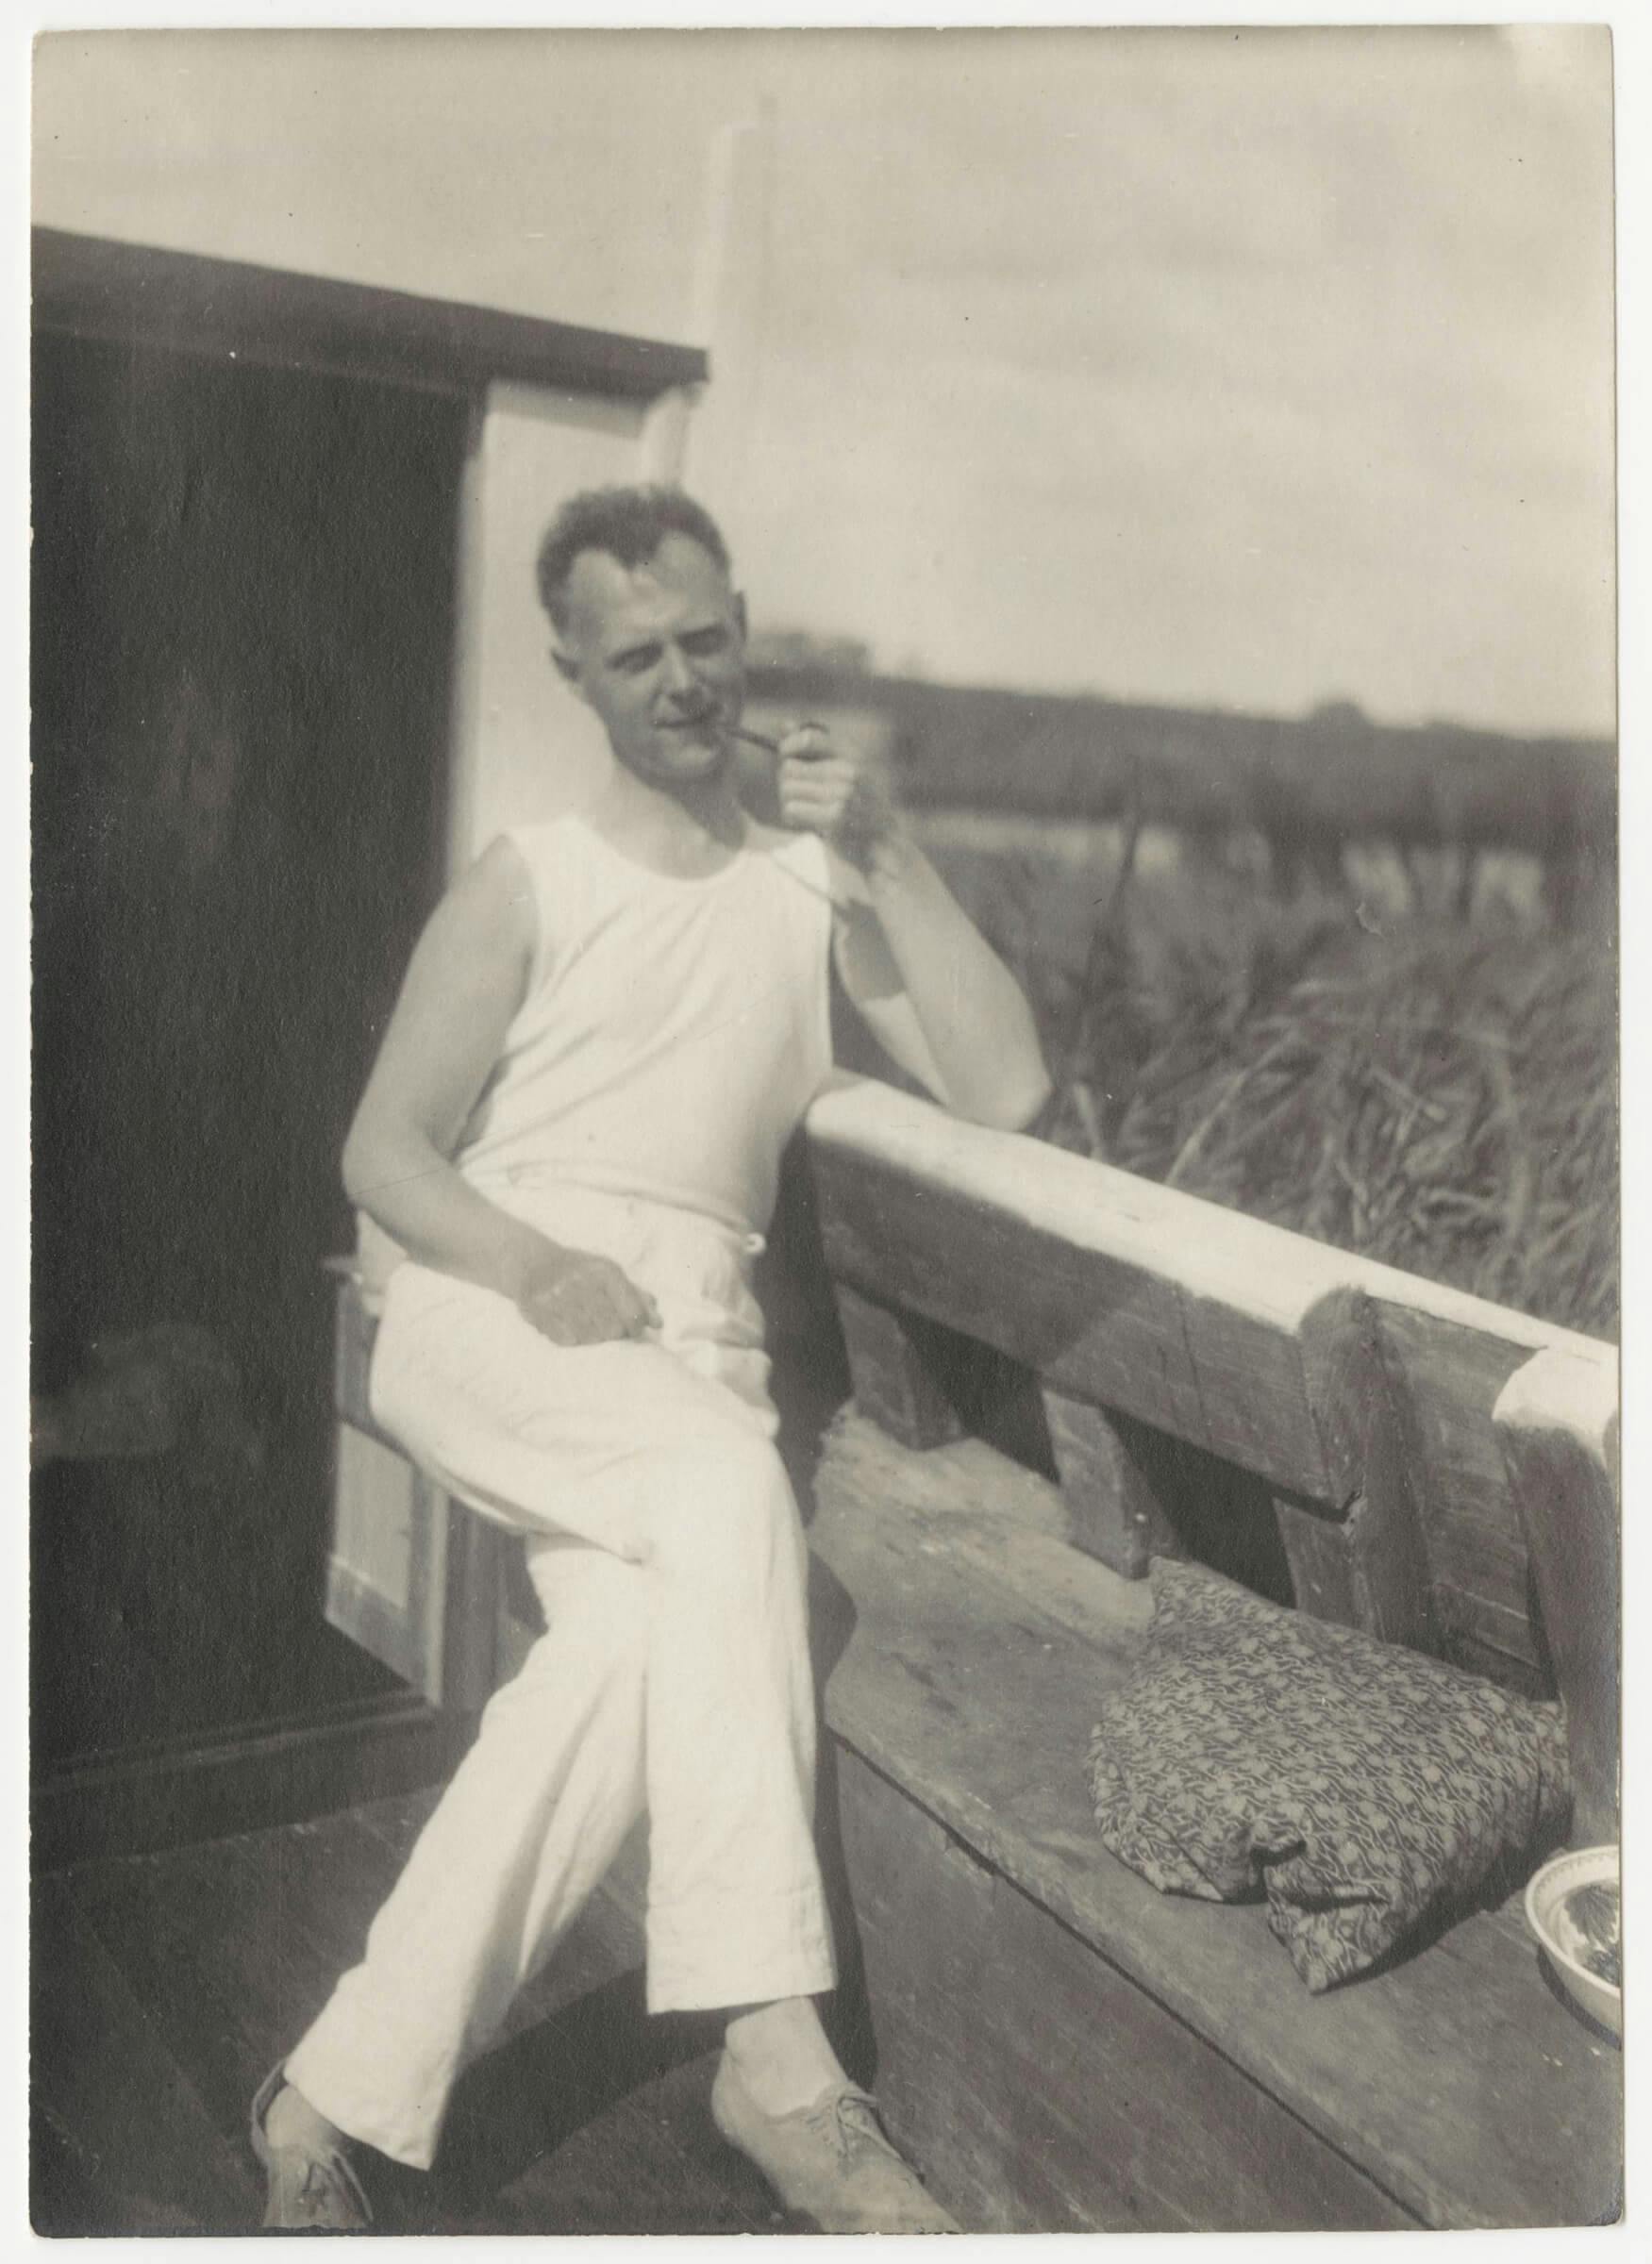 Verhagen during a sailing trip, c.1925. Besides being an avid walker and gardener, Verhagen was also a rower and sailor. Around 1920 he bought a wooden barge and made sailing trips around Friesland with friends, including his partner Granp… 